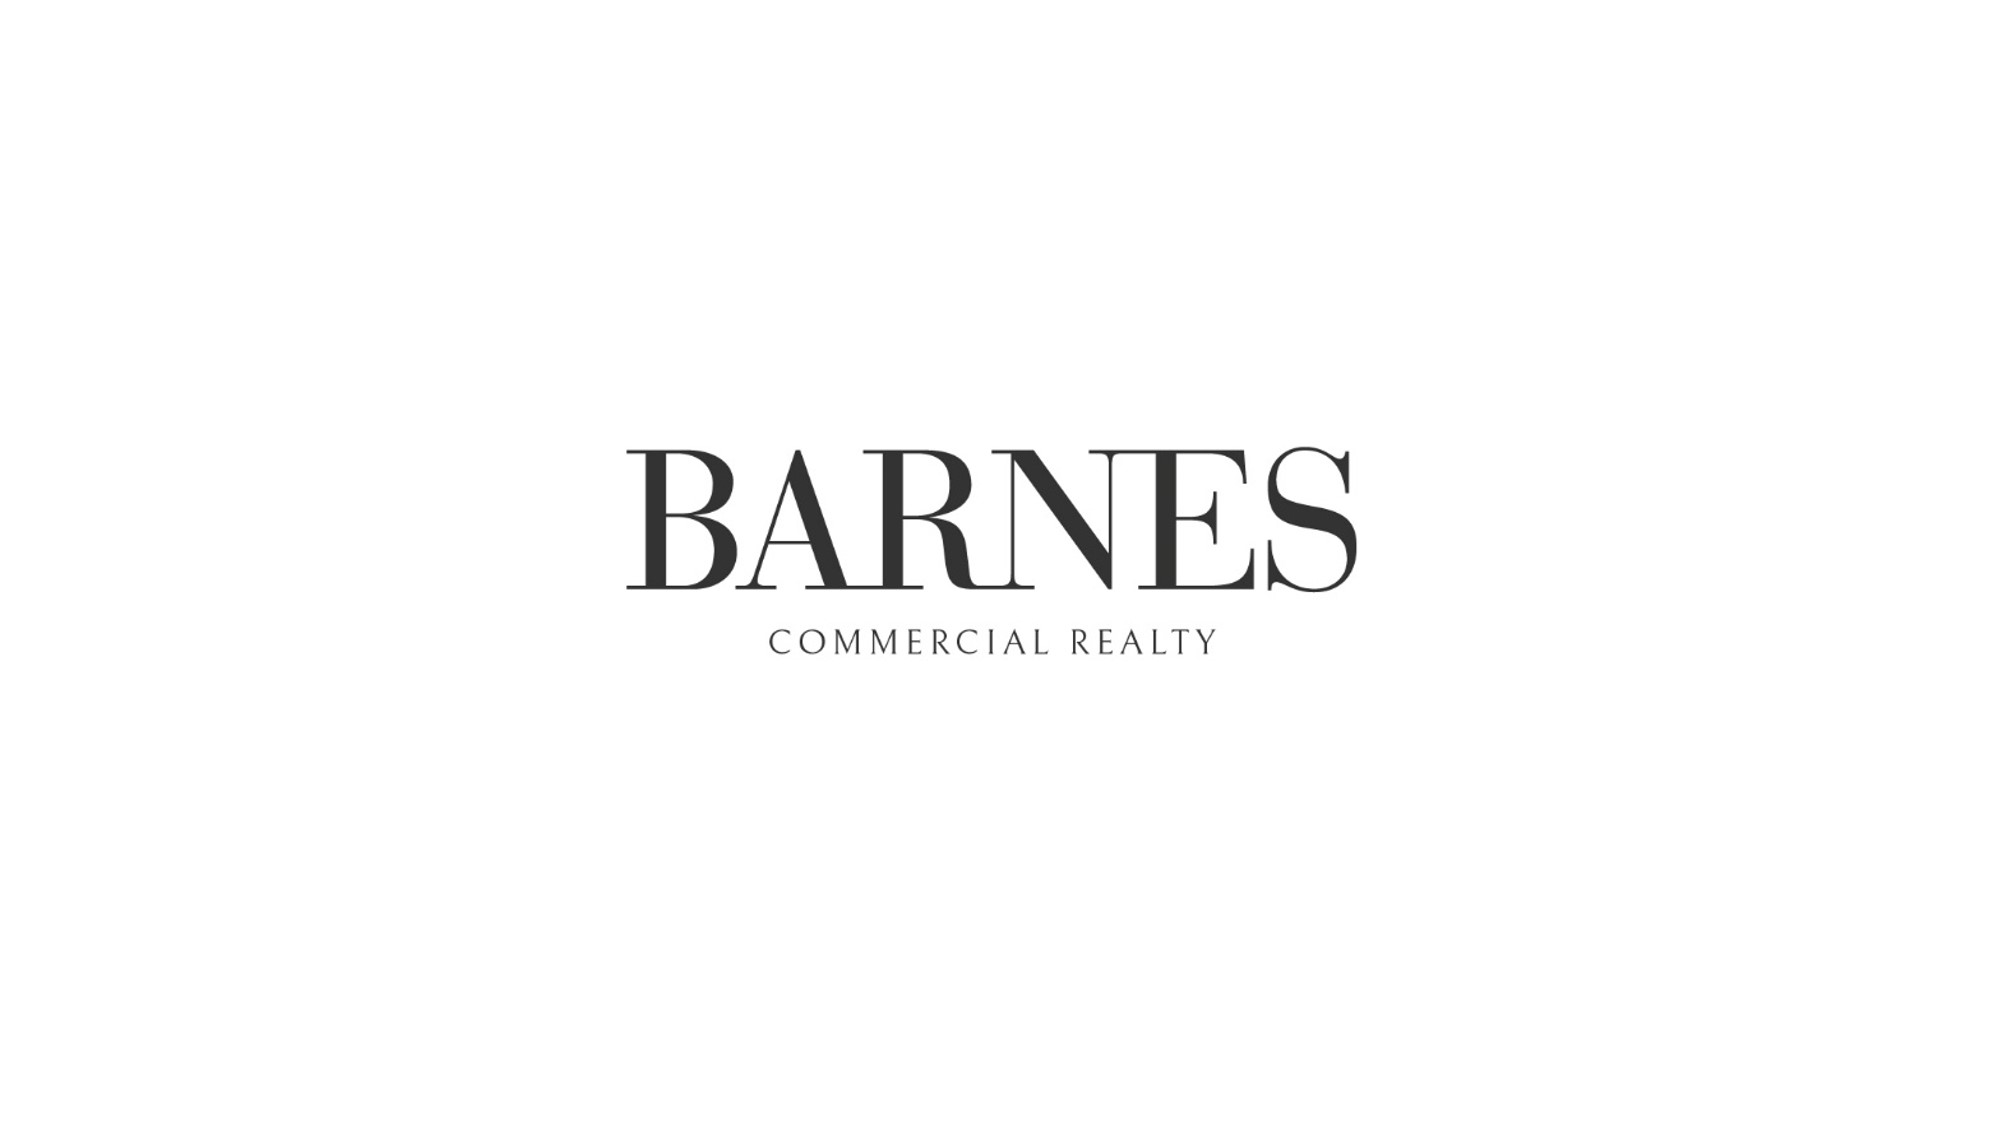 BARNES Commercial Realty